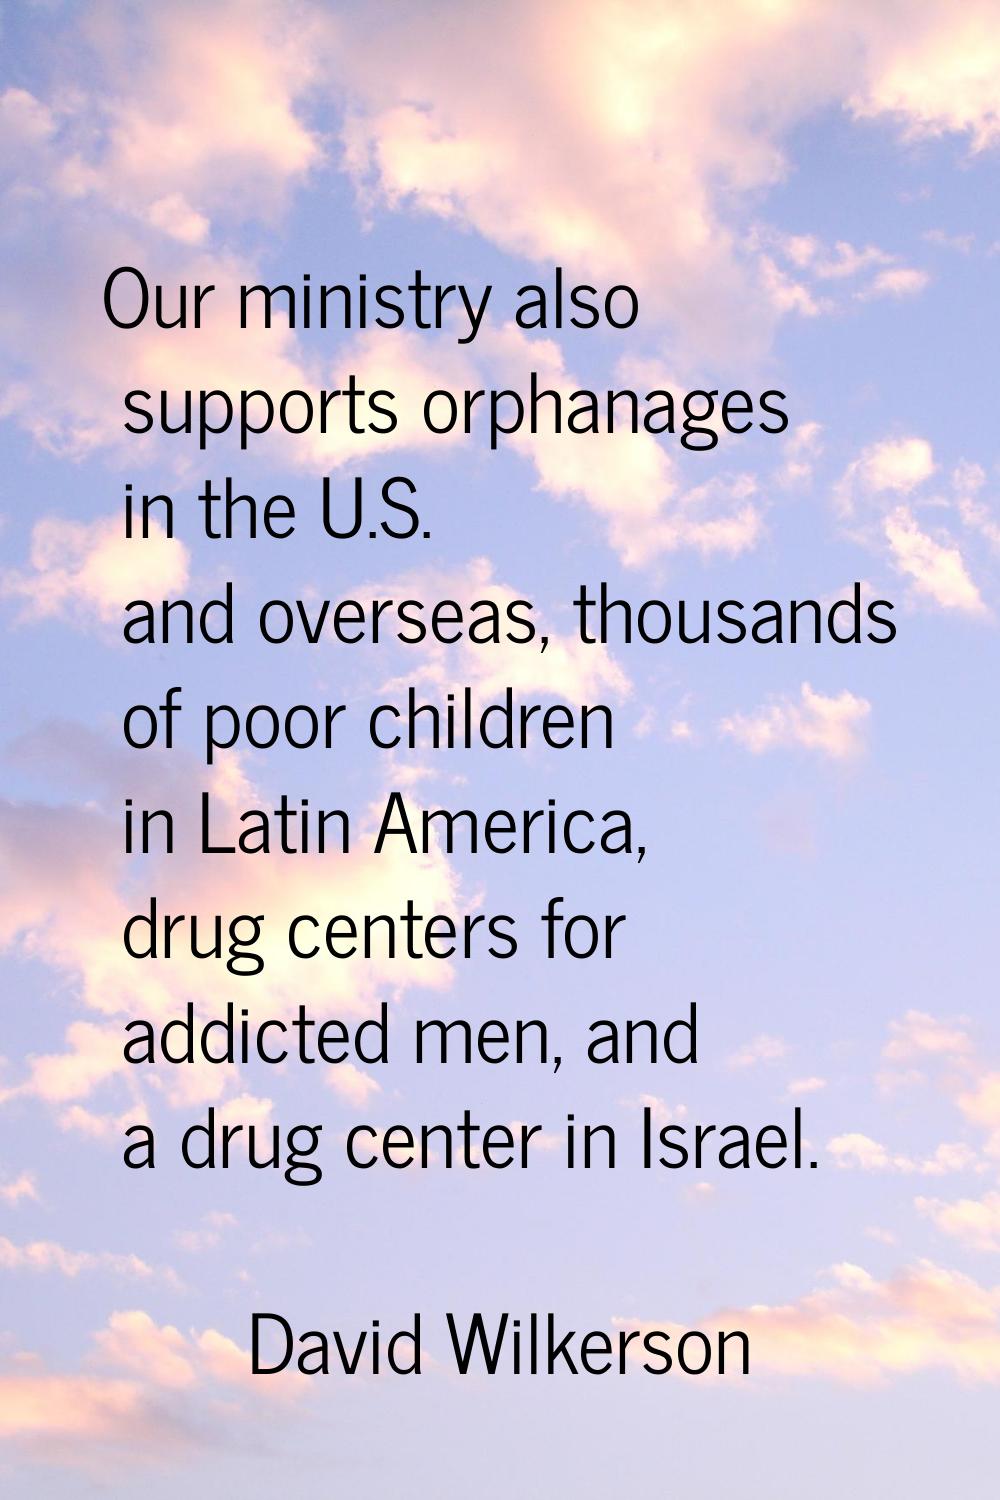 Our ministry also supports orphanages in the U.S. and overseas, thousands of poor children in Latin